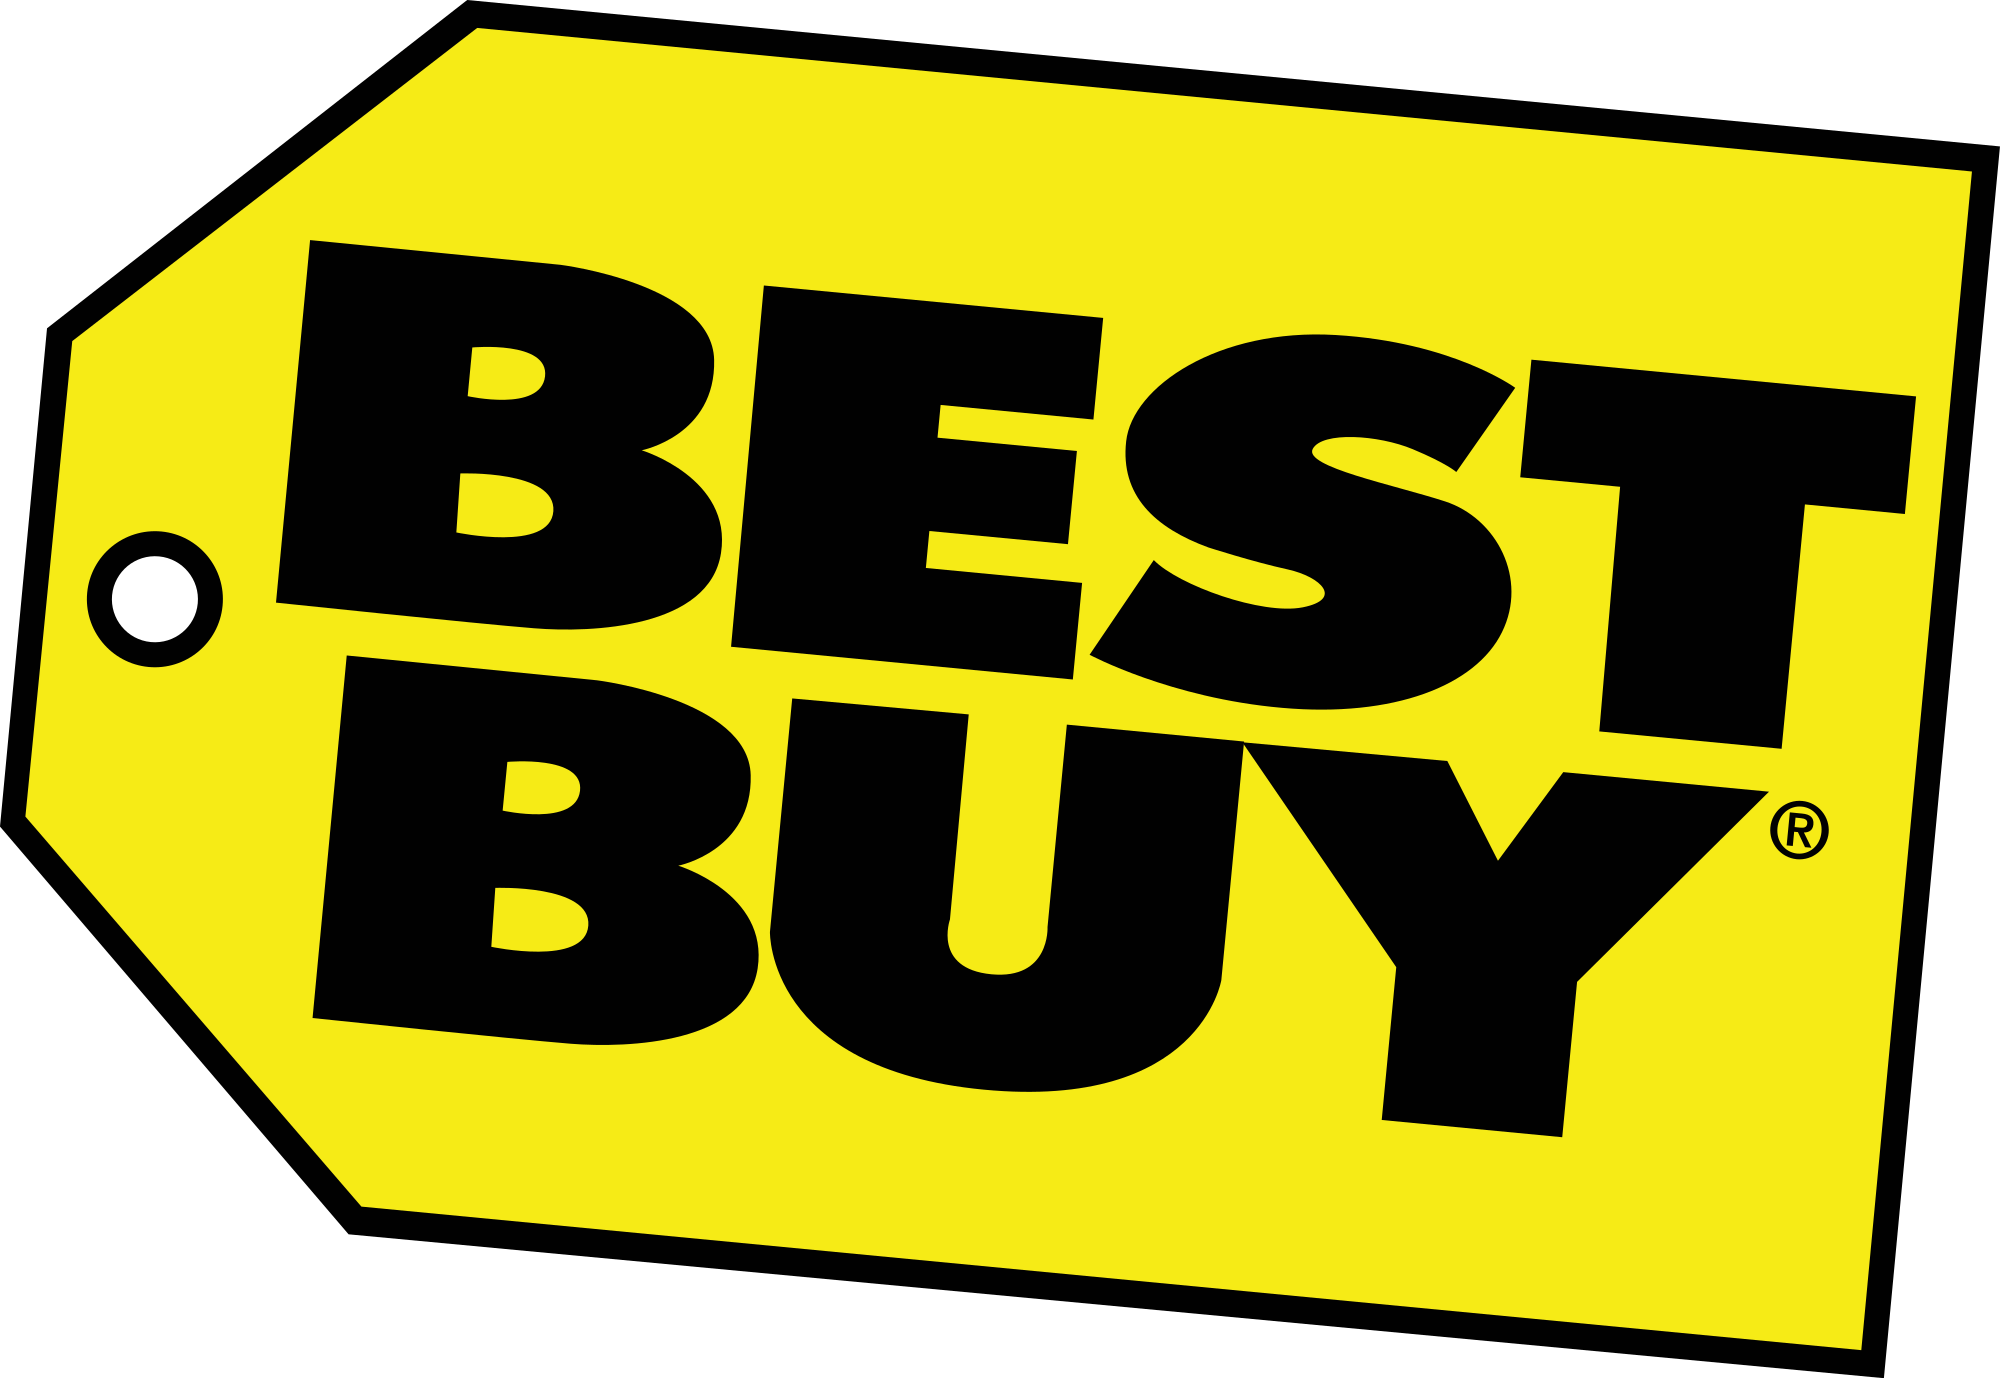 Best Buy Will Price Match All Local Retailer Competitors - Best Buy Logo Png (2000x1378)